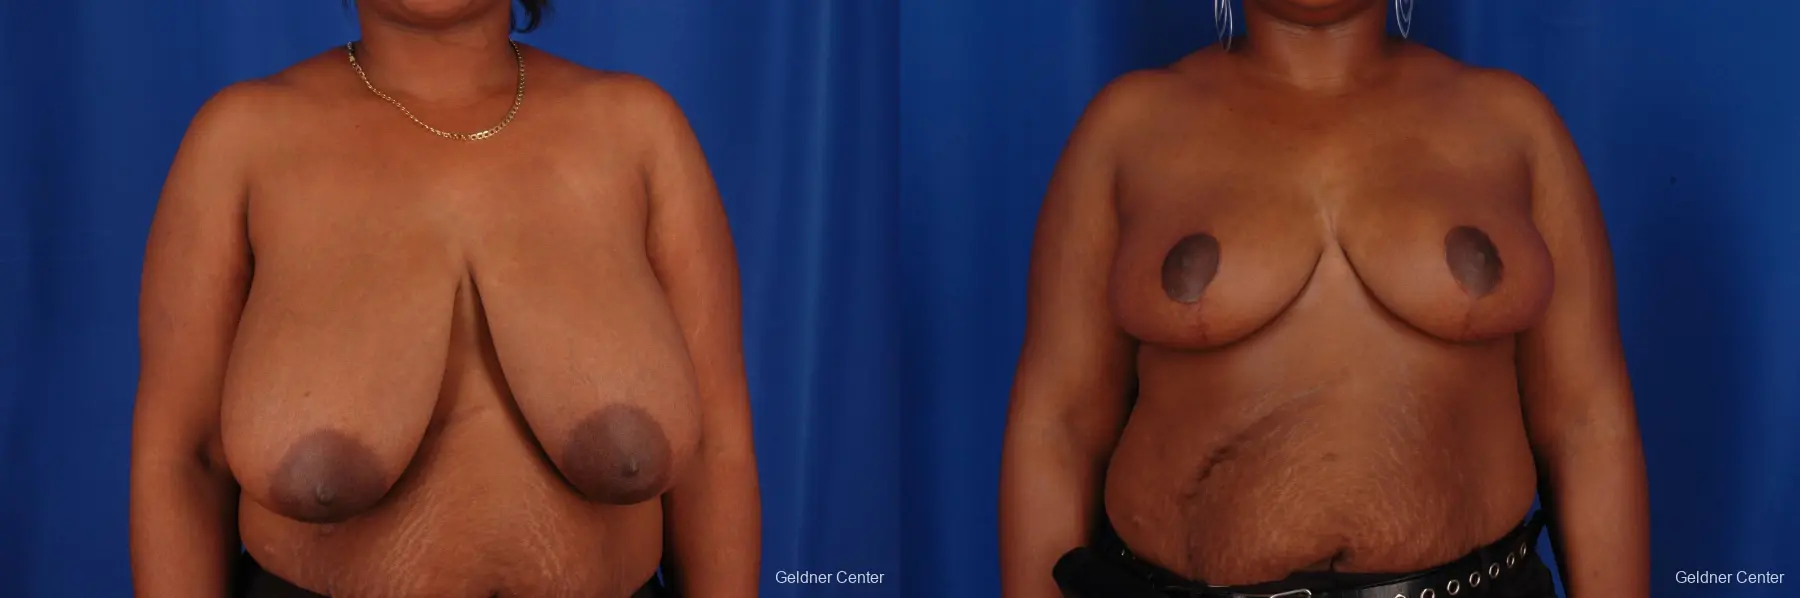 Breast Reduction Hinsdale, Chicago 2334 - Before and After